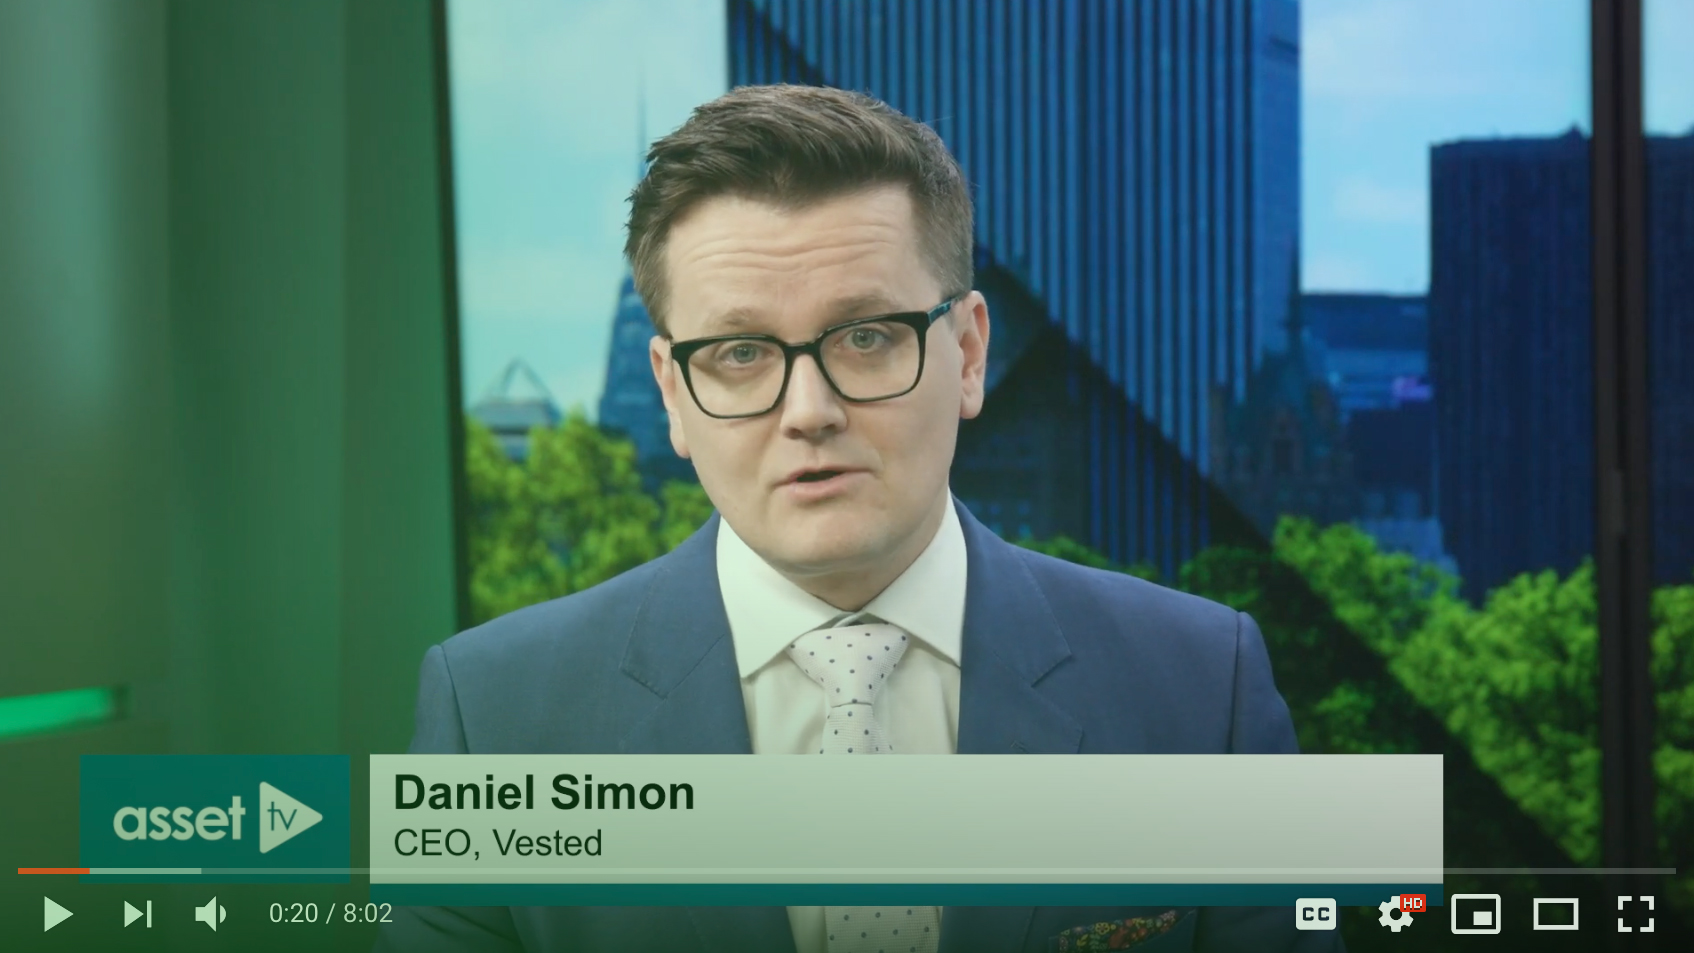 Daniel Simon, CEO of Vested, speaking at an appearance on "asset TV".